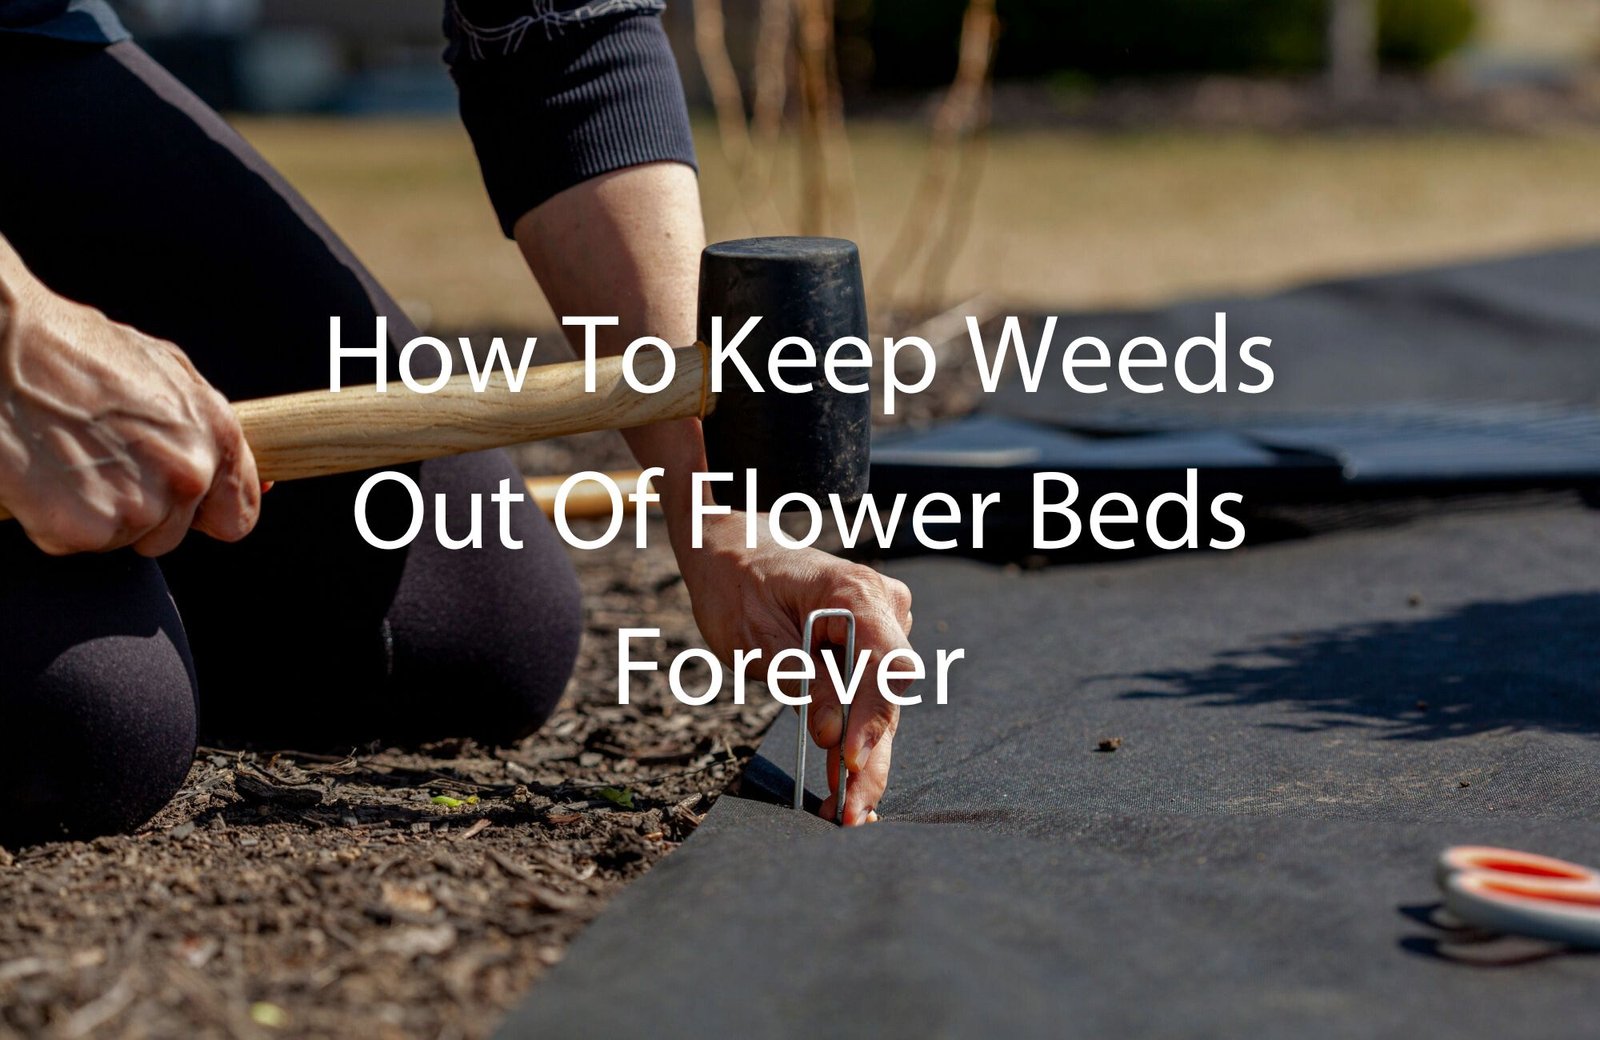 Keep Weeds Out of Flower Beds